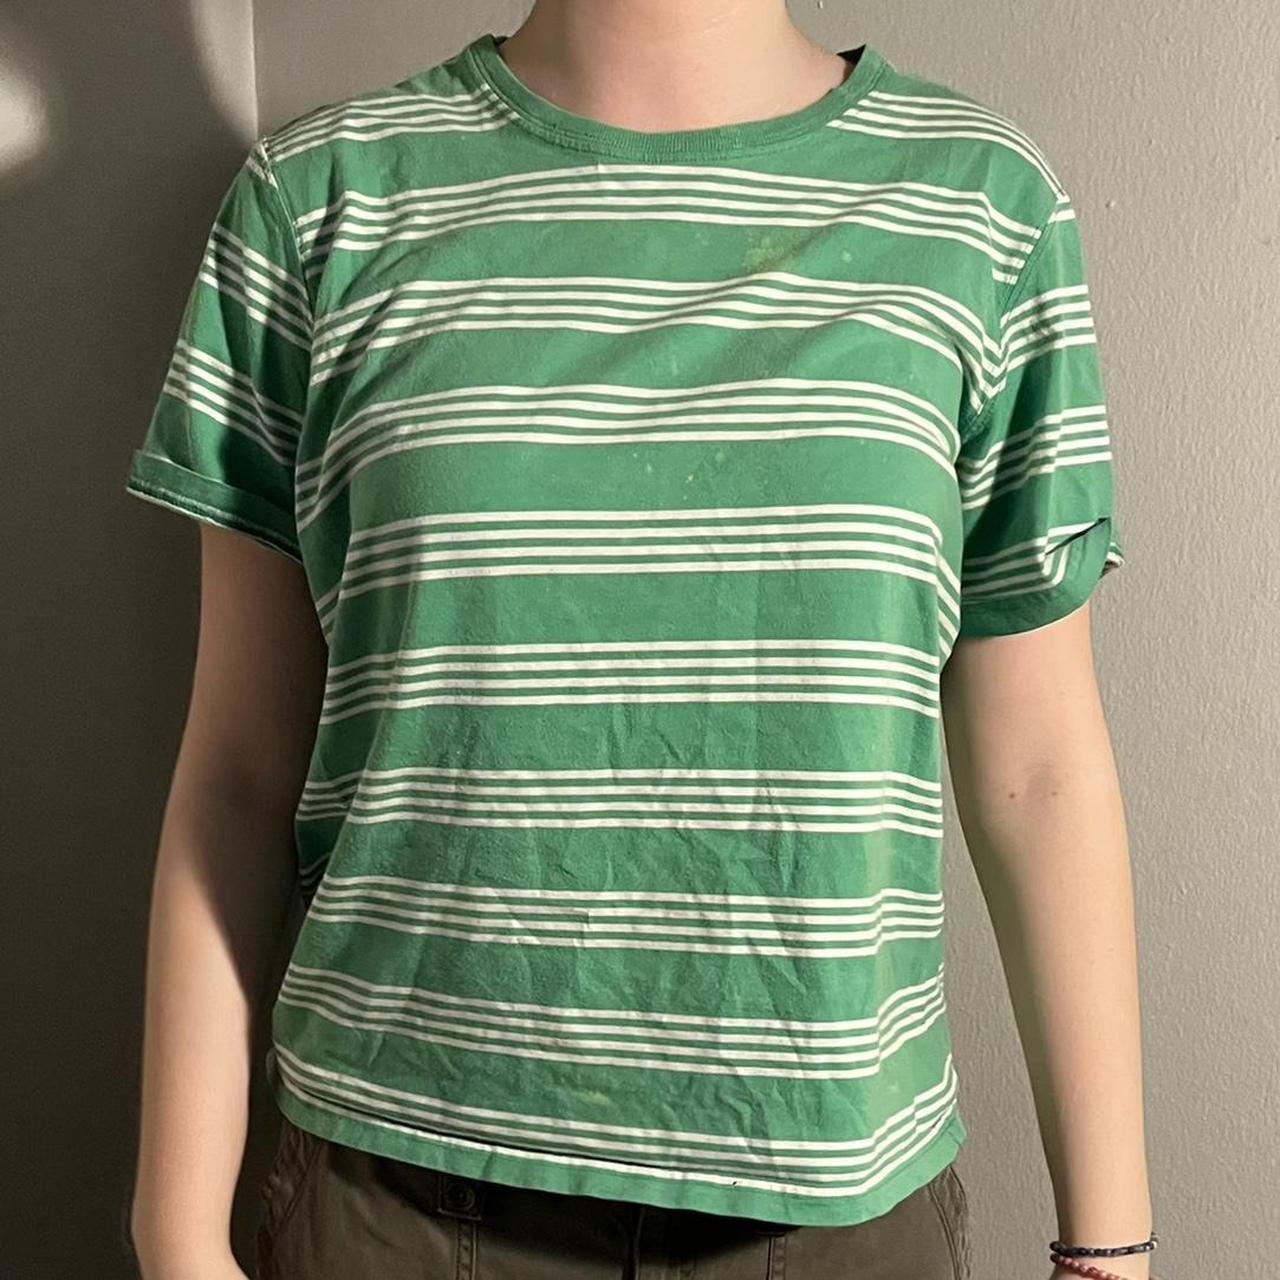 Green and White T-shirt | Depop